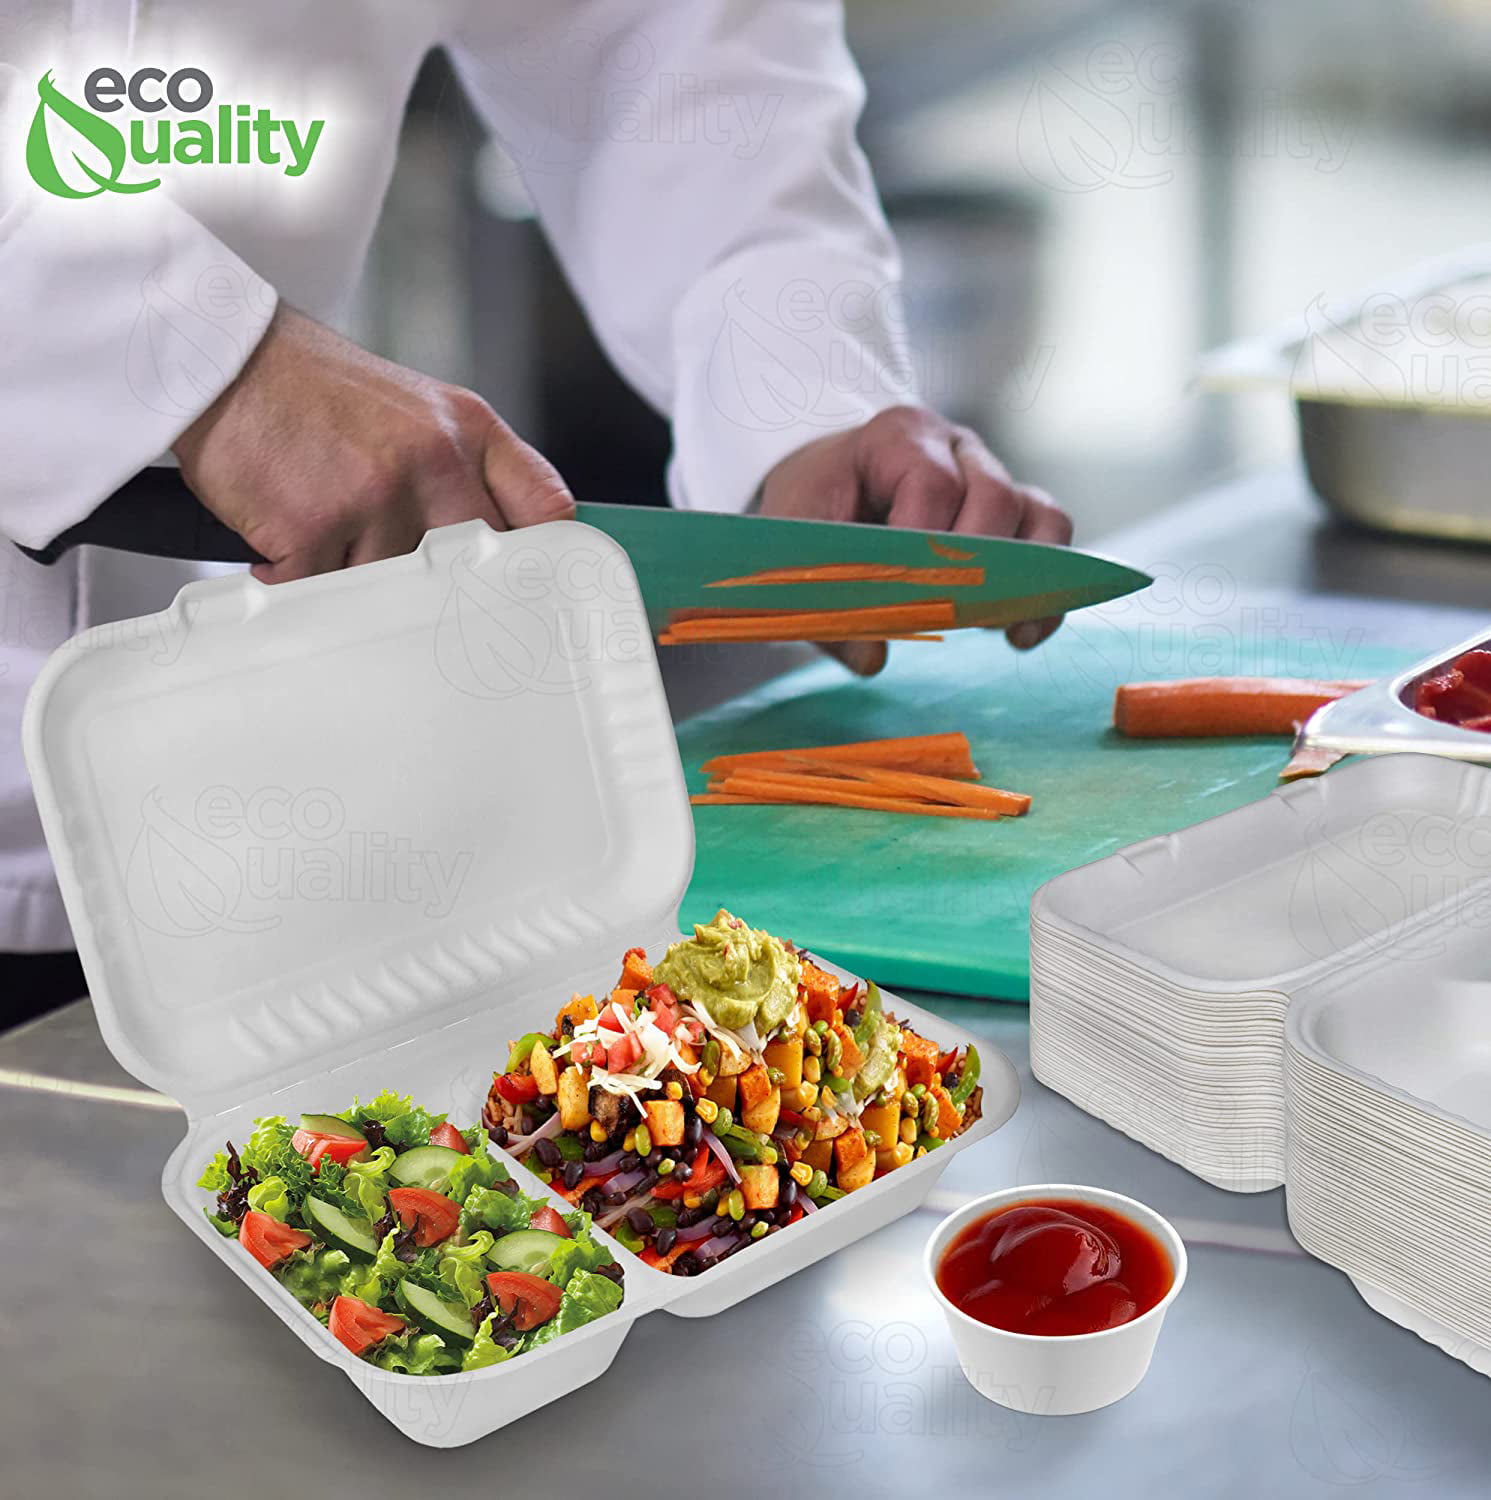 9x6x3 ECO BIODEGRADABLE COMPOSTABLE FIBER HINGED CONTAINERS